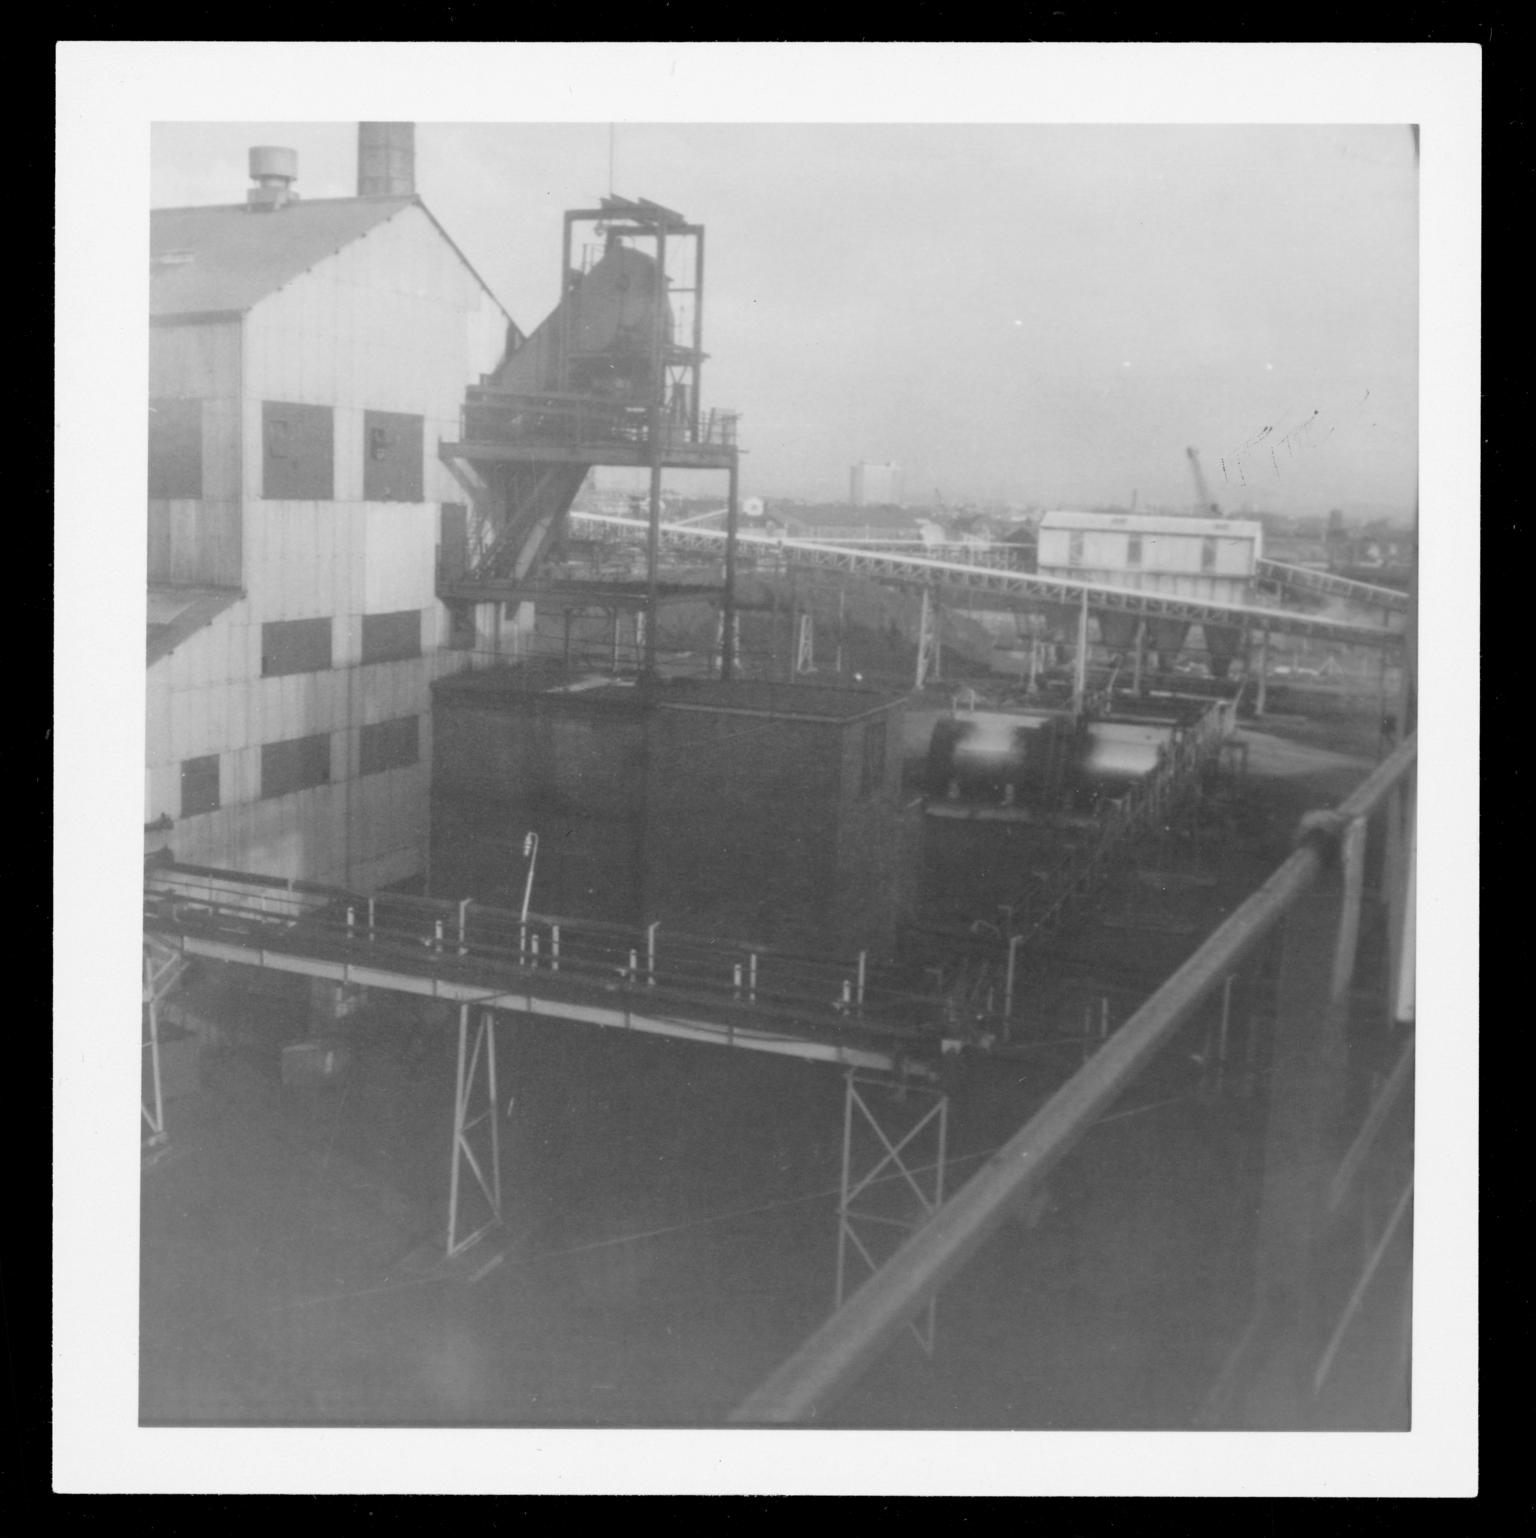 Crown patent fuel works, Cardiff, photograph